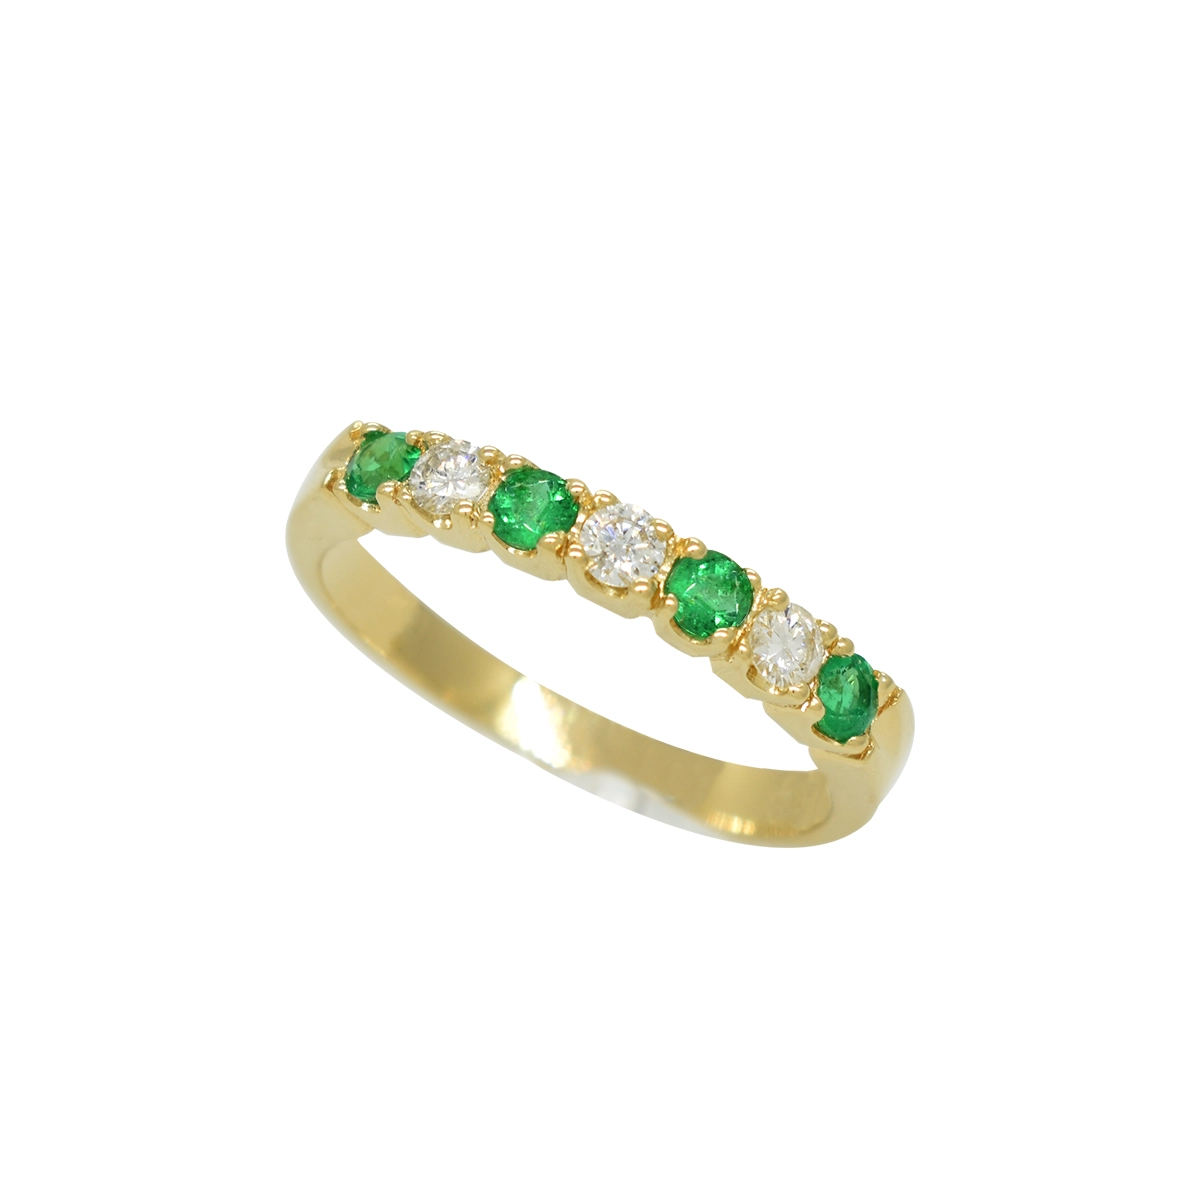 emerald-and-diamond-wedding-band-in-18k-gold-classic-prong-setting